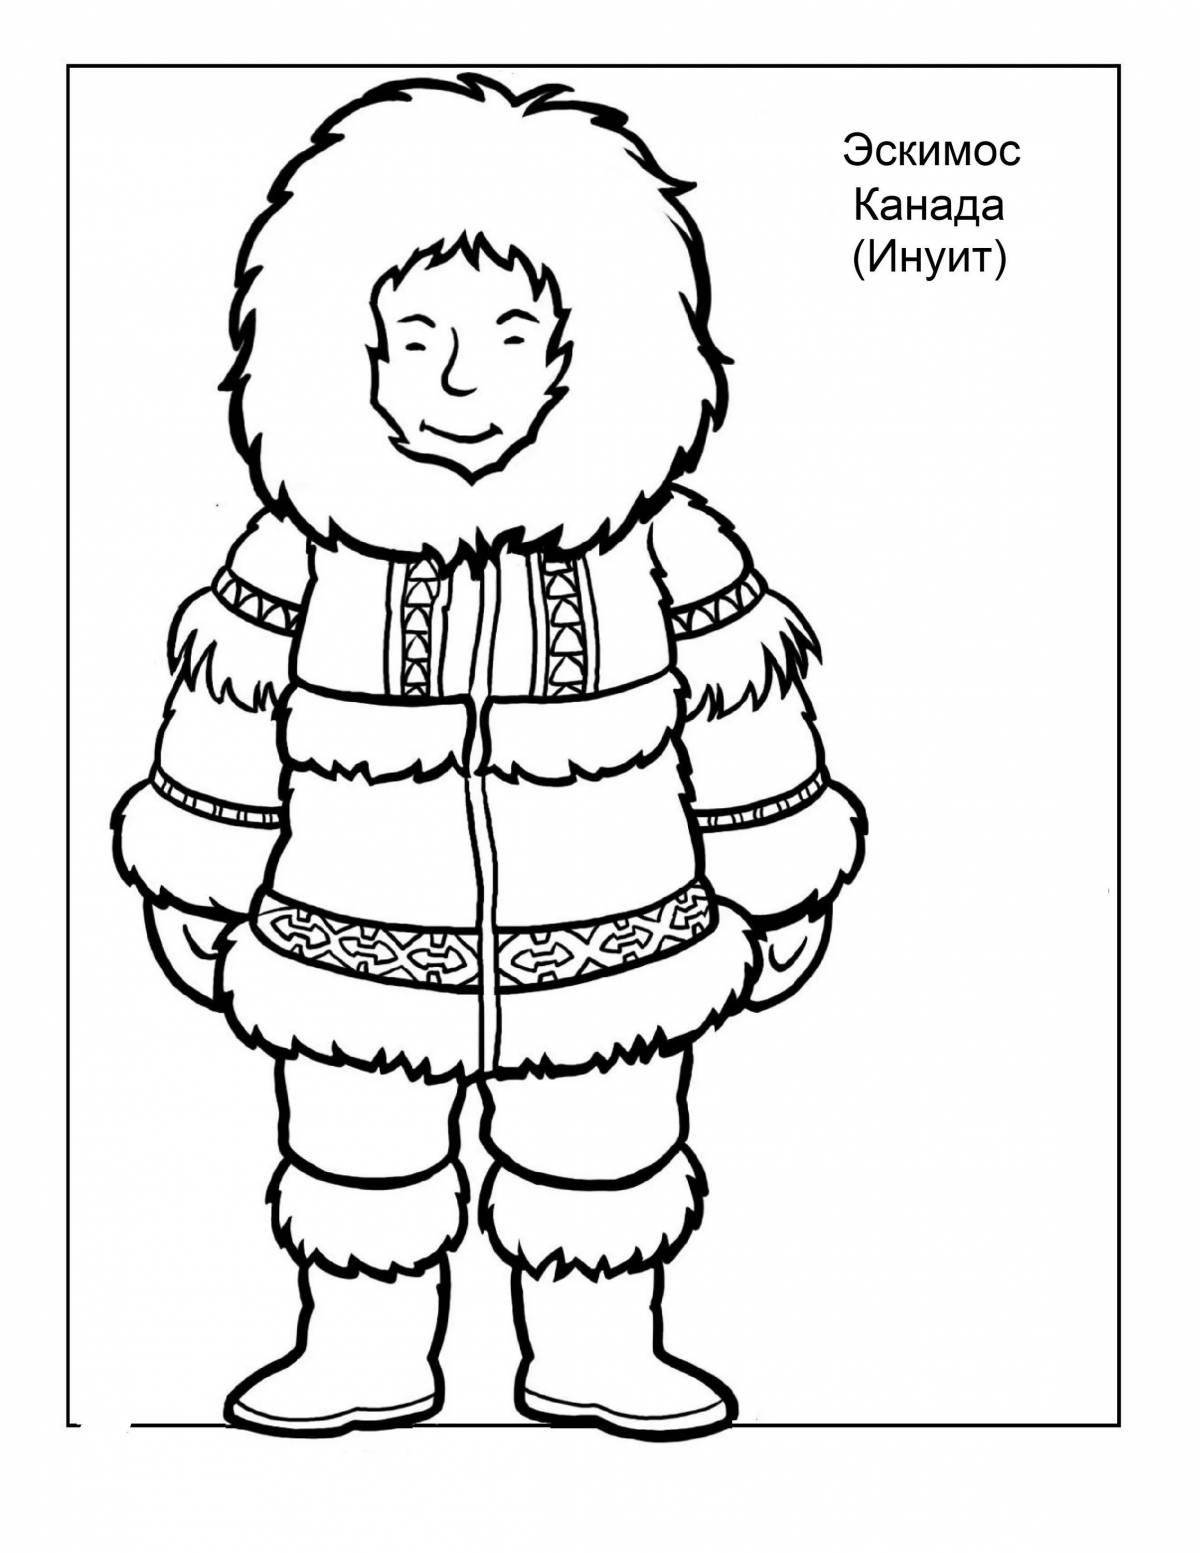 Coloring book colorful national costume of the Yakuts